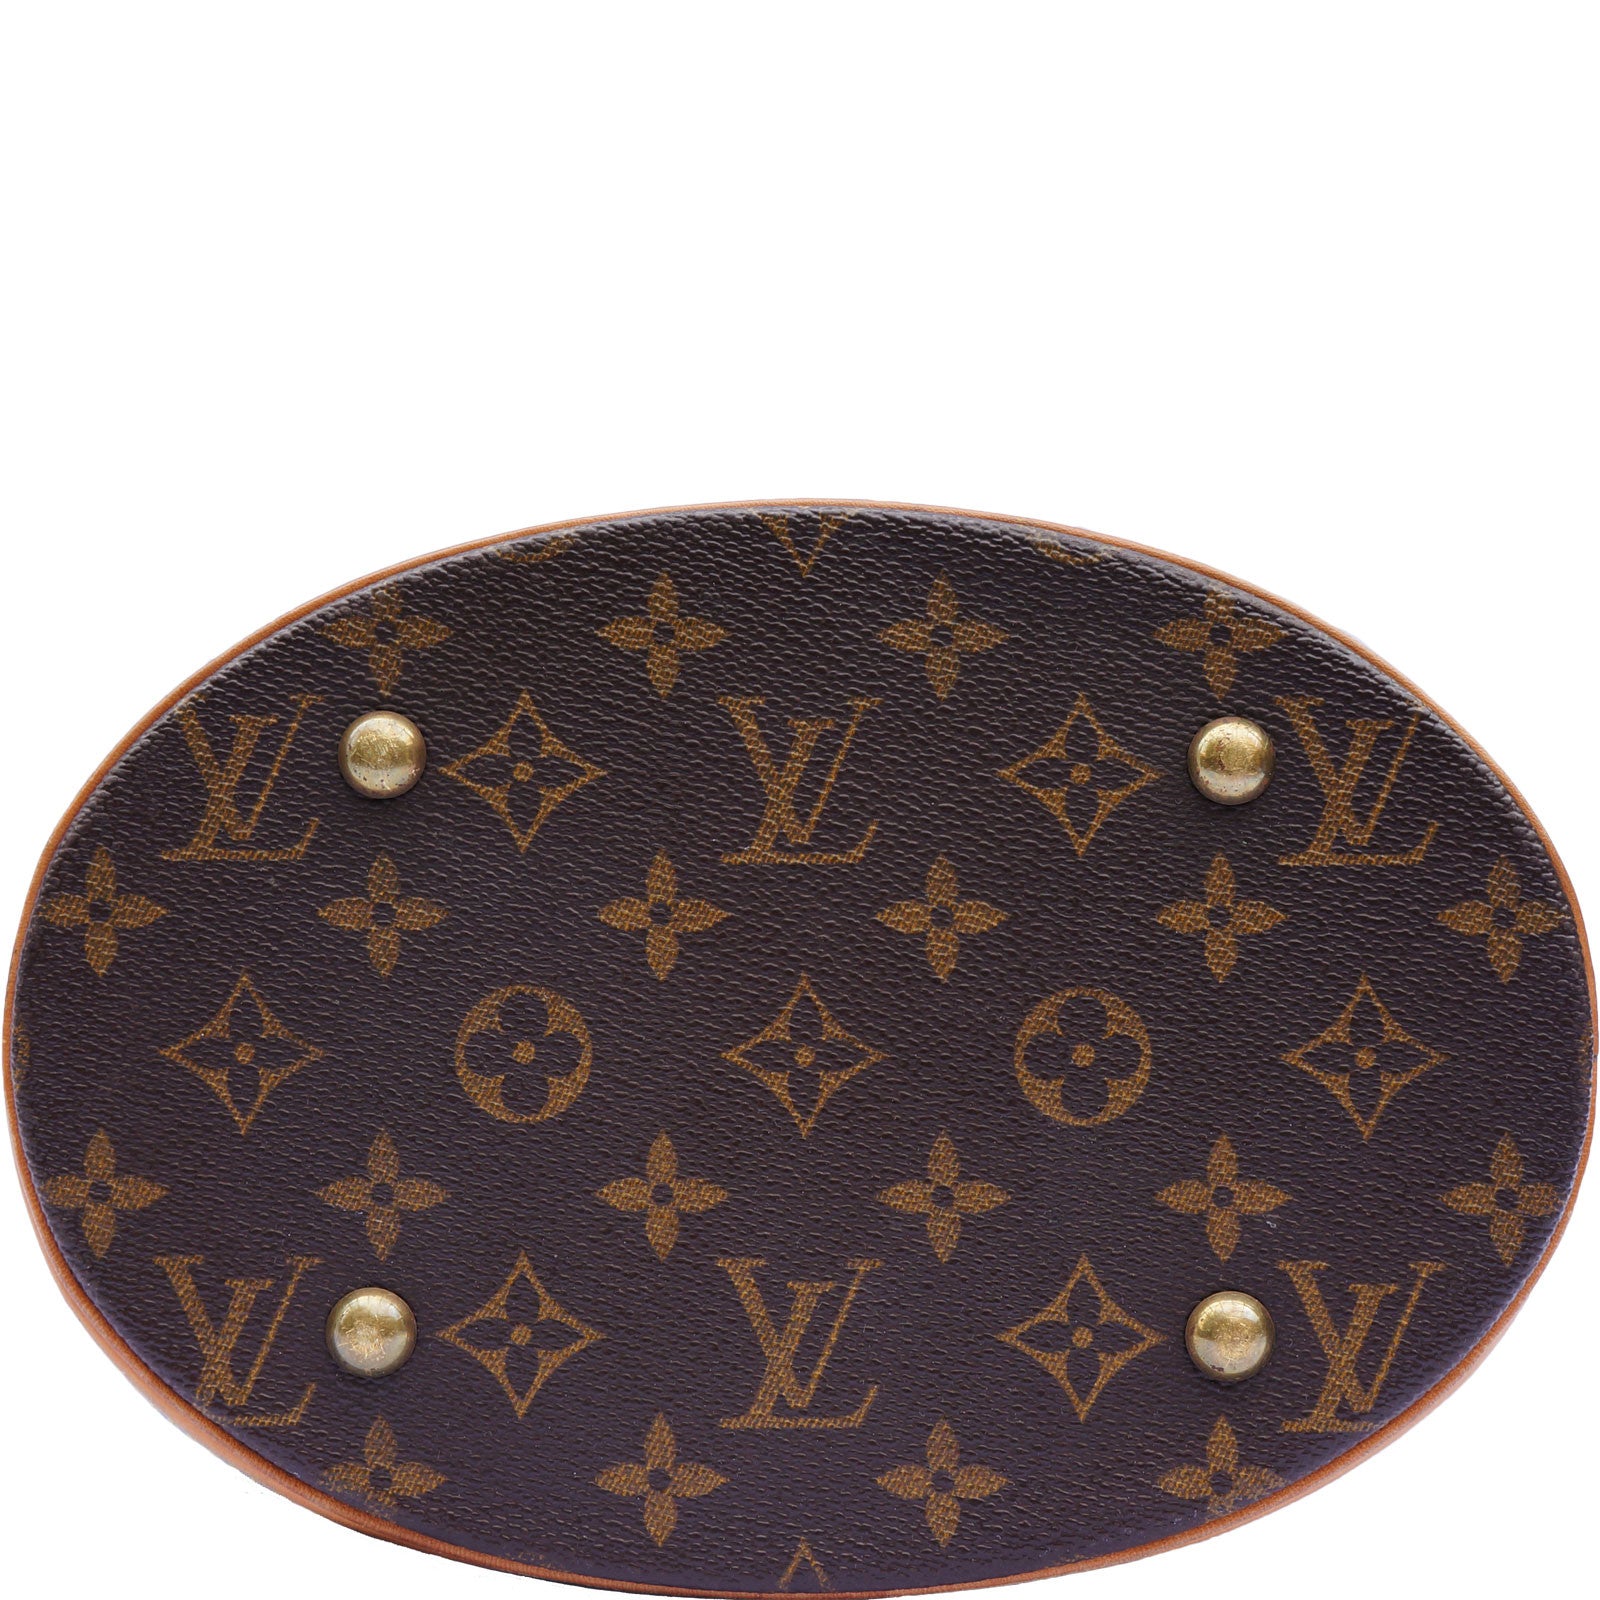 Louis Vuitton Bags For $200  Natural Resource Department